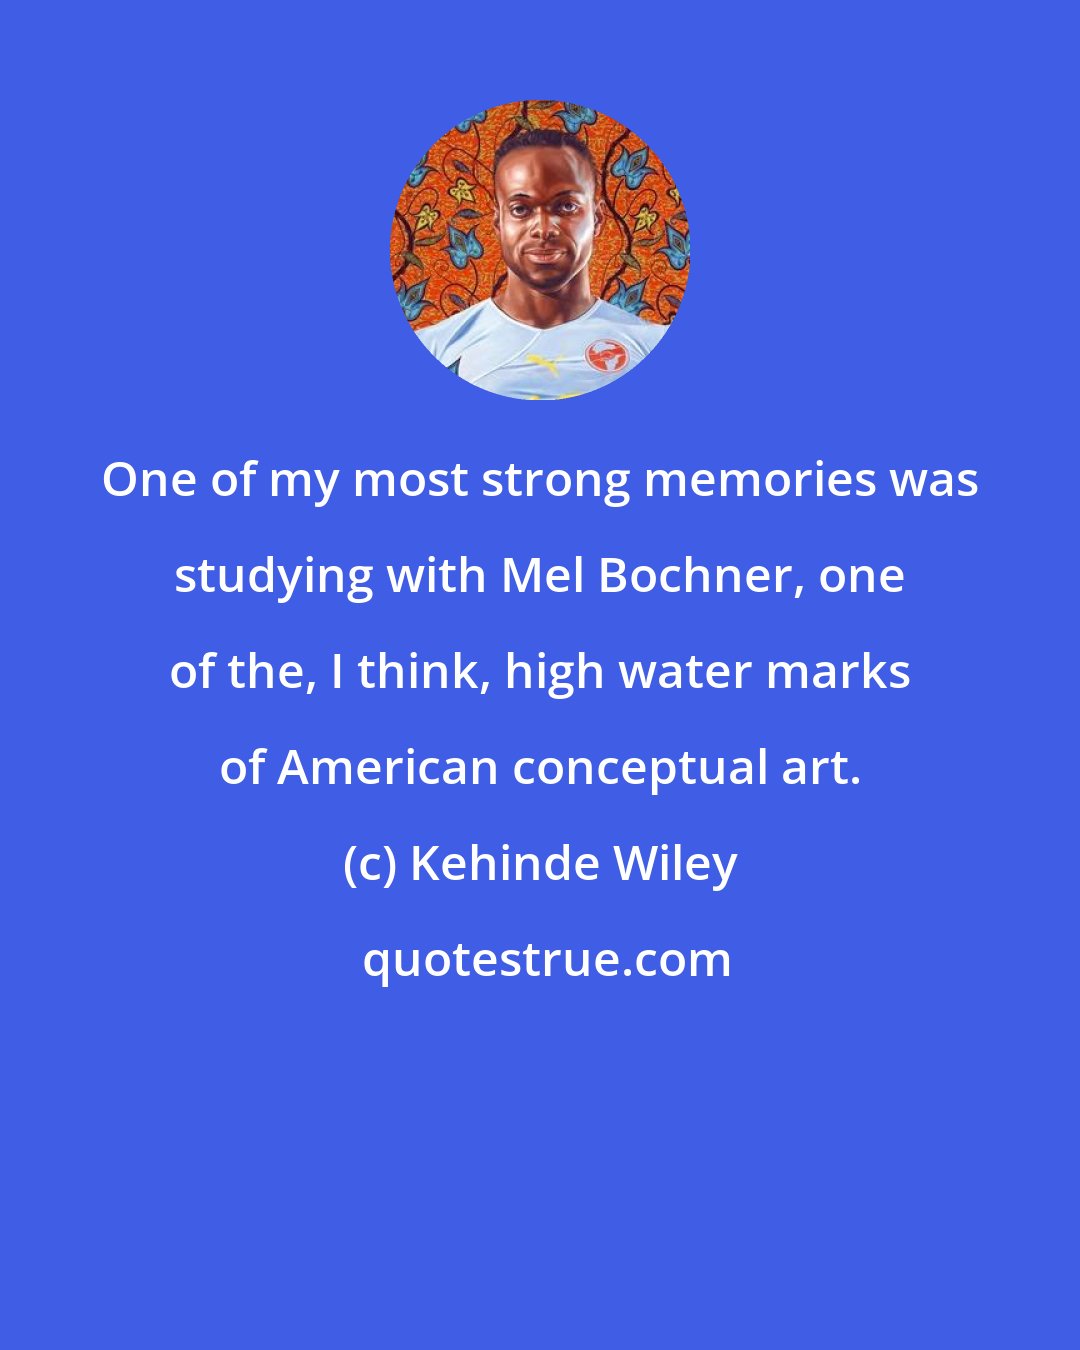 Kehinde Wiley: One of my most strong memories was studying with Mel Bochner, one of the, I think, high water marks of American conceptual art.